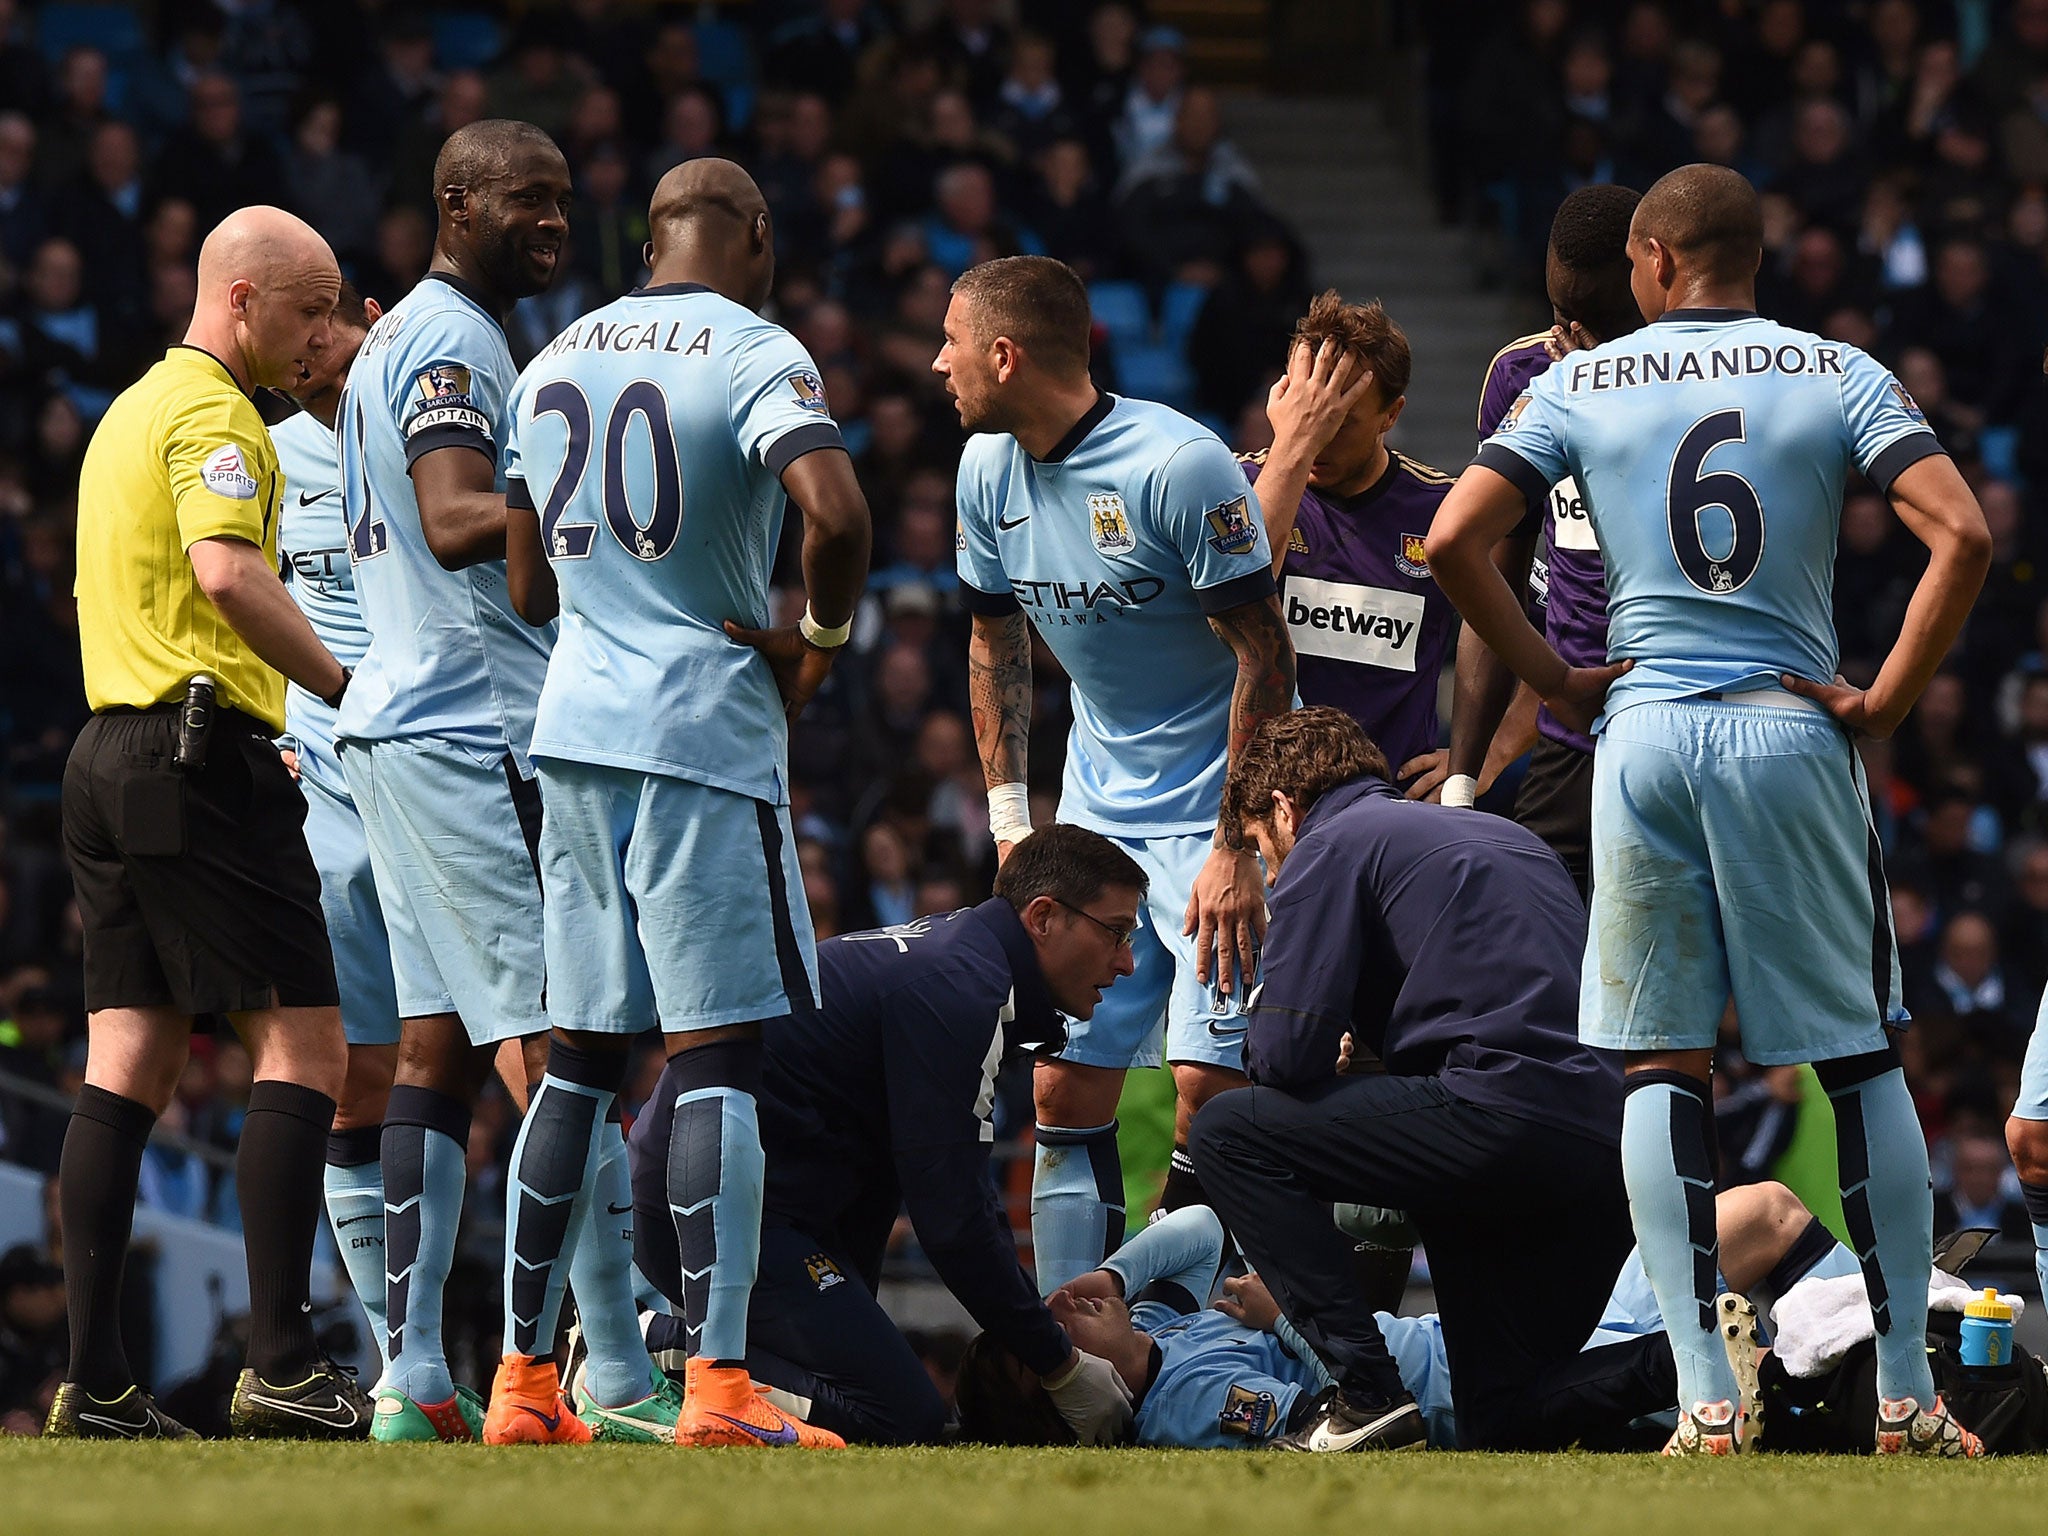 David Silva is treated after clashing with Cheikhou Kouyate